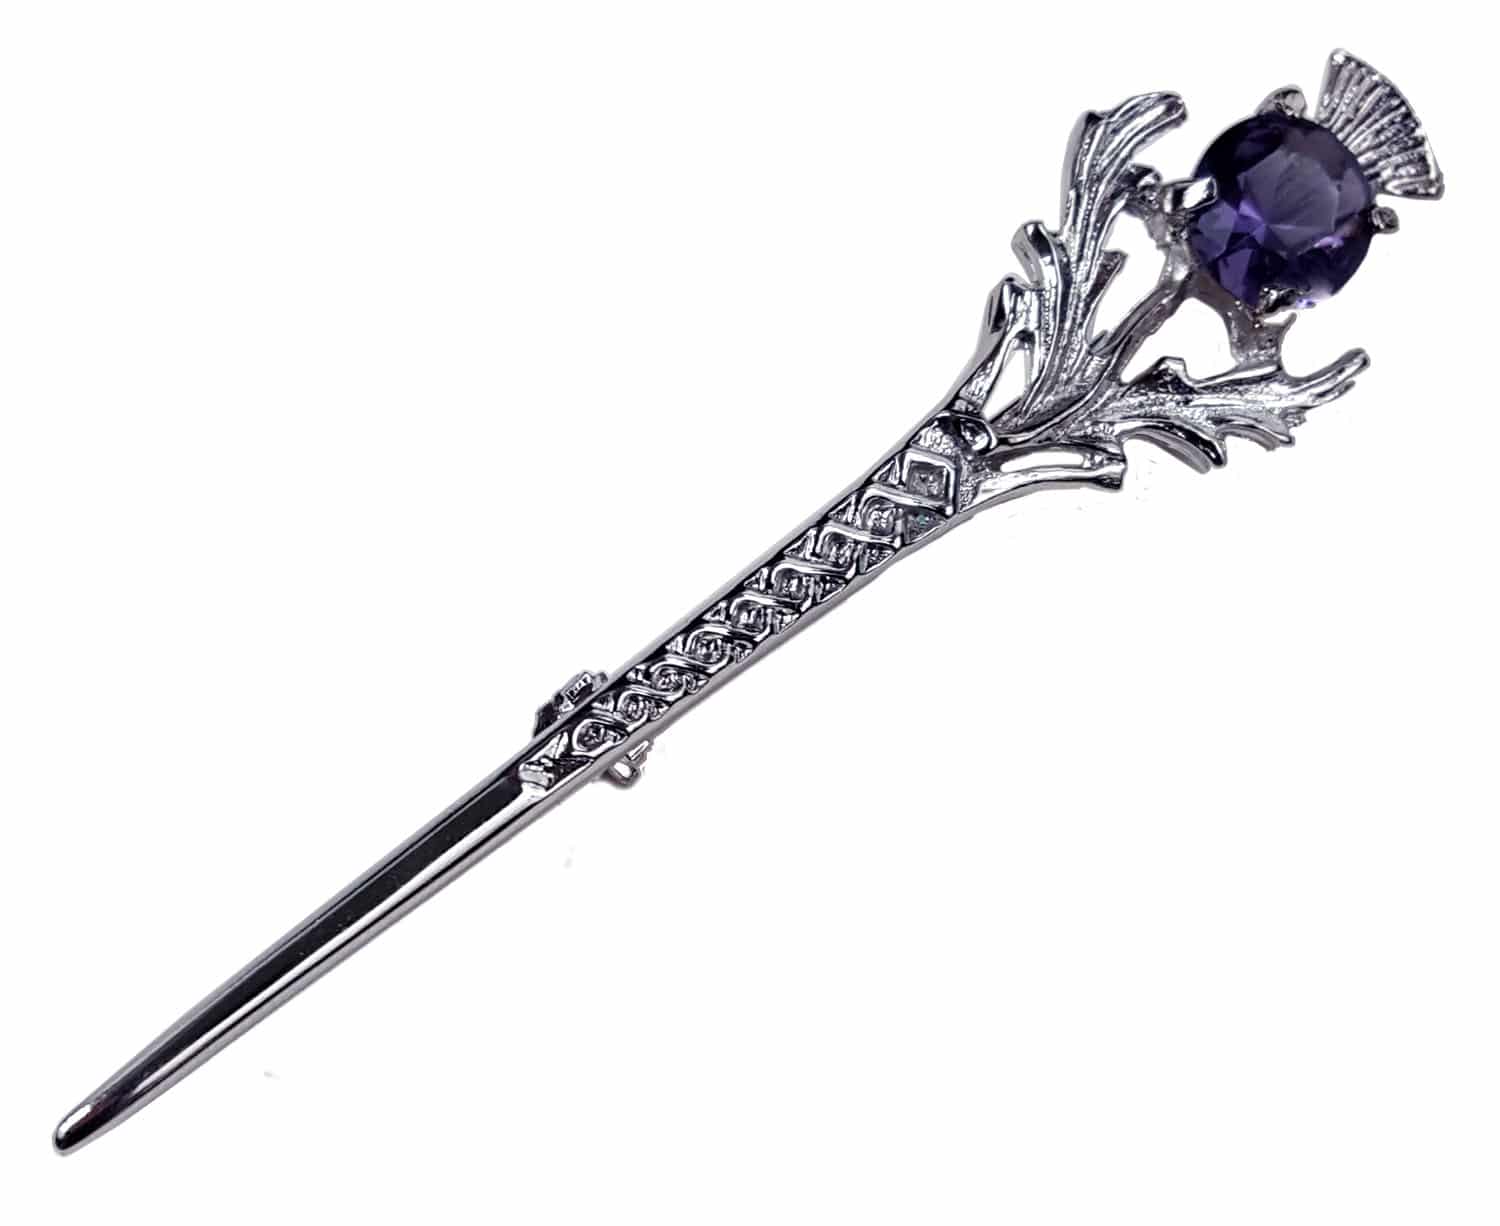 A thistle topped kilt pin with a purple amethyst for the thistle flower